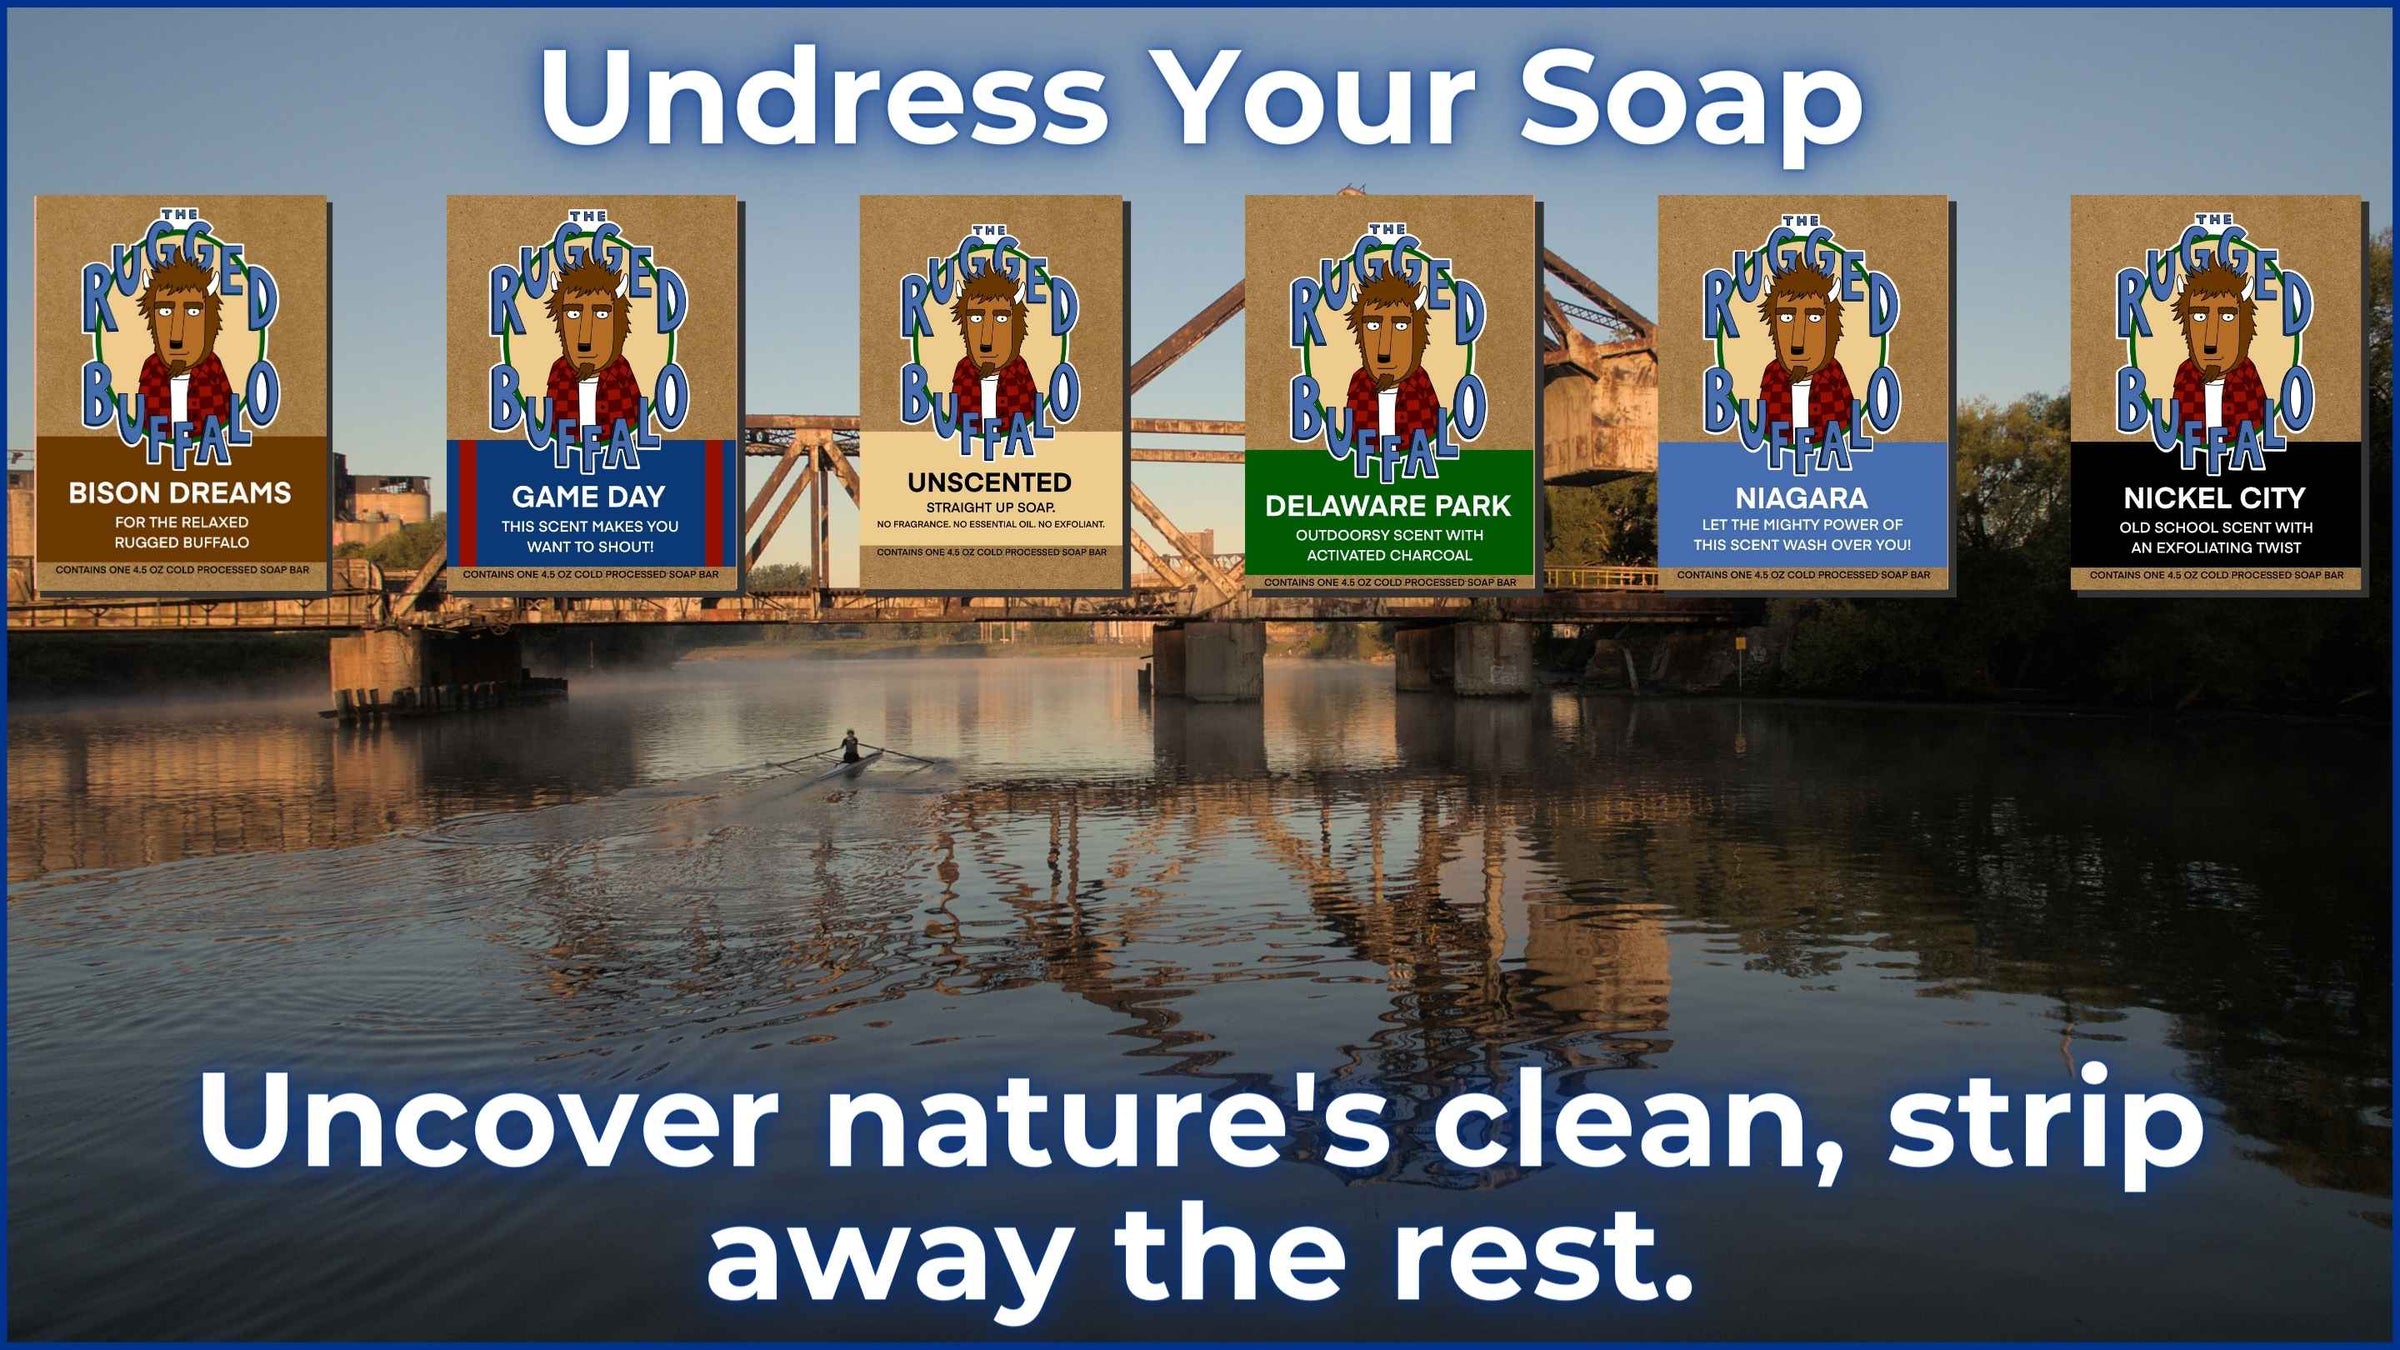 Lineup of 'The Rugged Buffalo' natural soap bars, displayed above a serene Buffalo waterfront, inviting you to 'Undress Your Soap'. Variants like Bison Dreams, Game Day, and Niagara celebrate Buffalo’s rich heritage, perfect for a clean, refreshing experience.